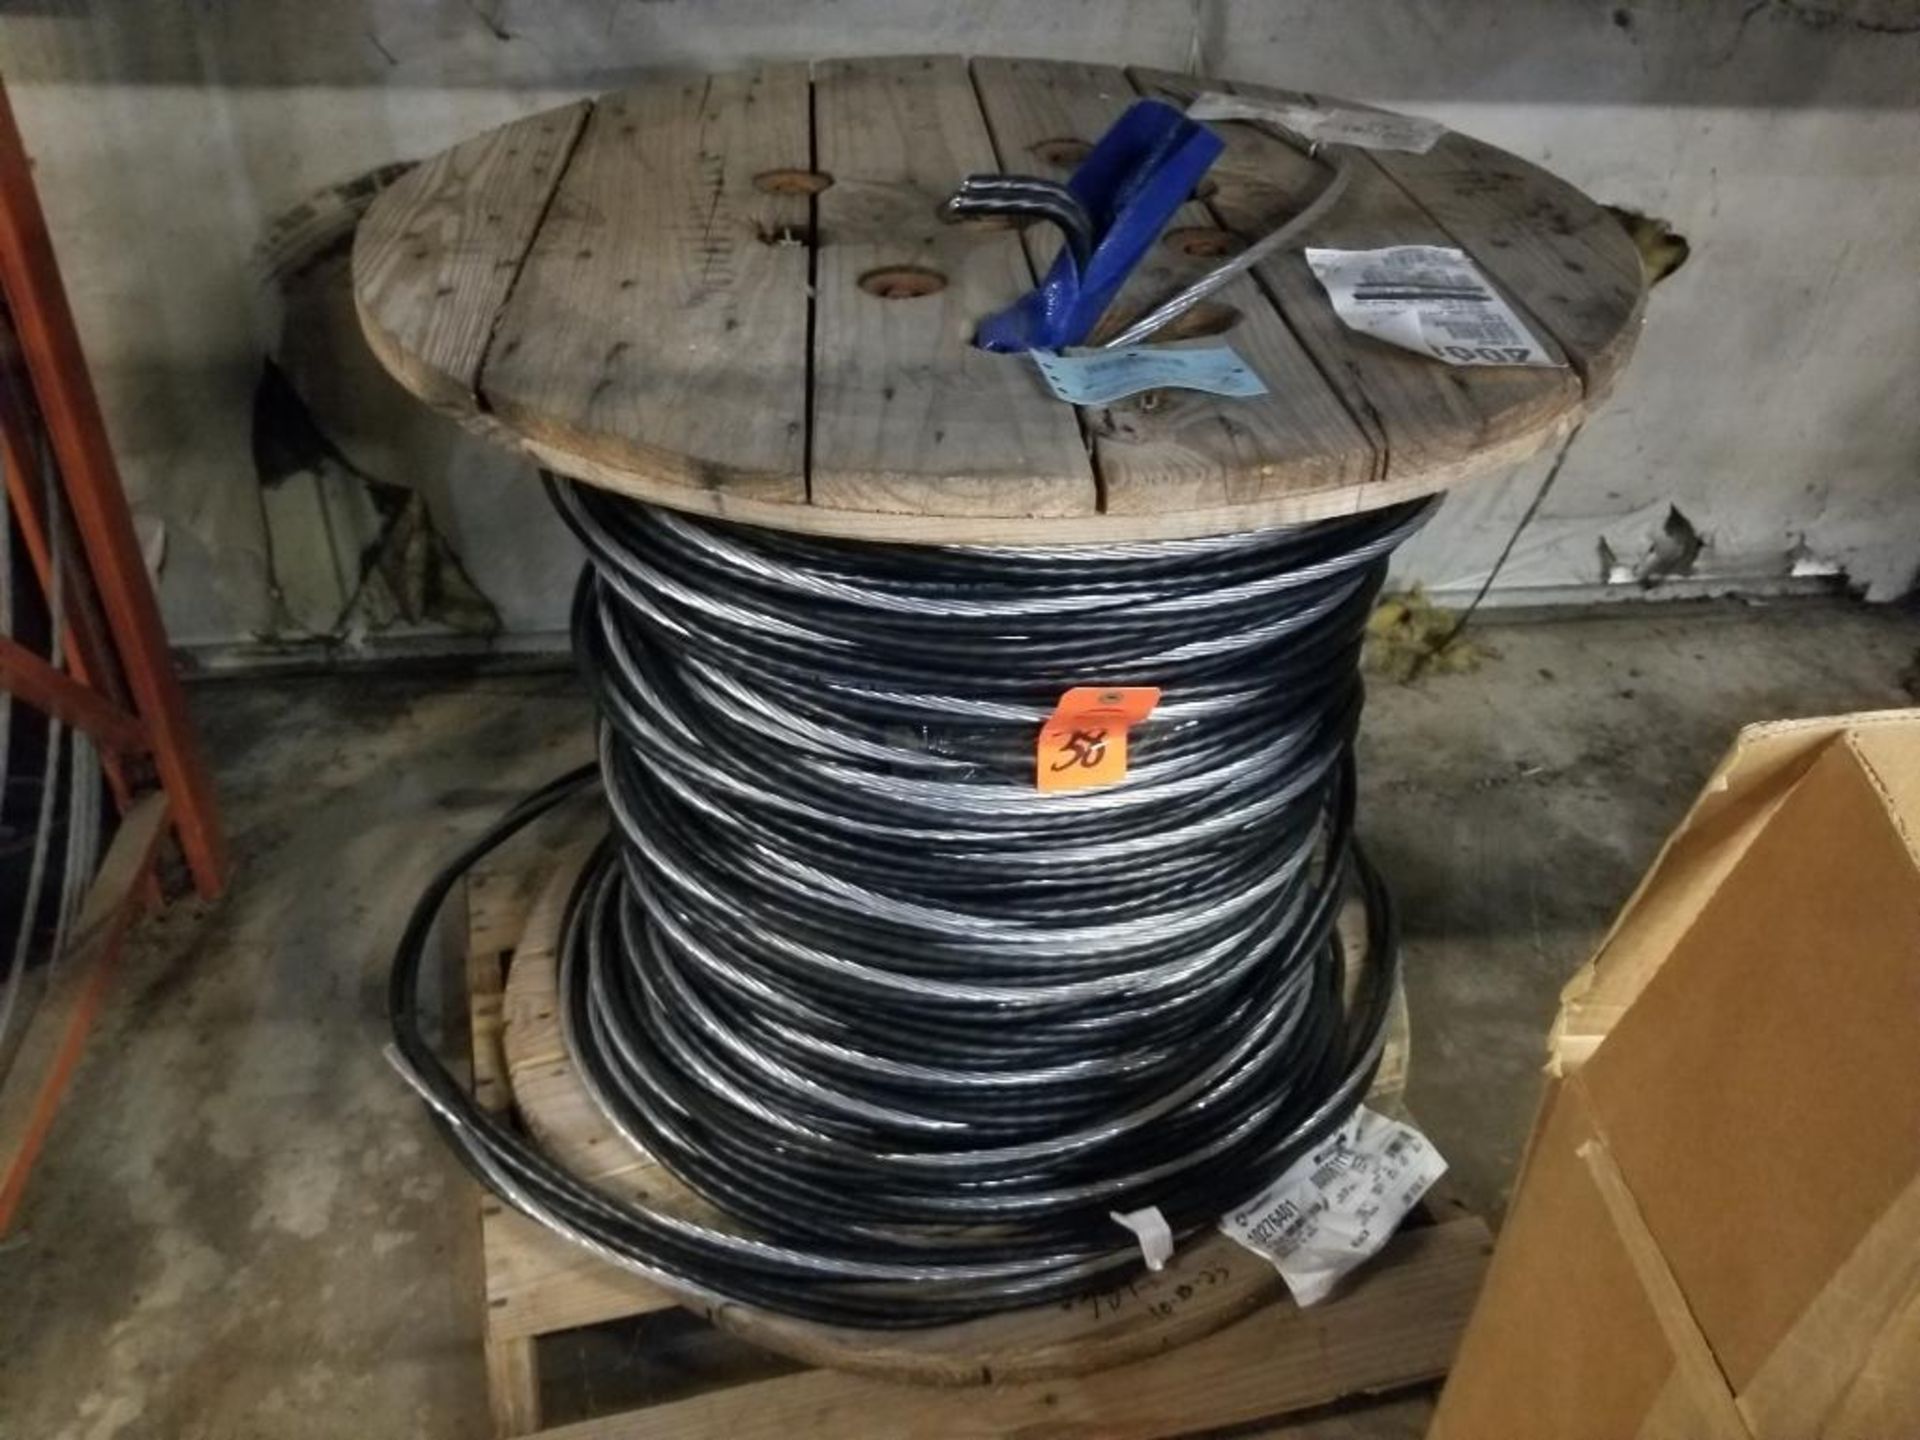 Spool of Southwire. Multiconductor wire.